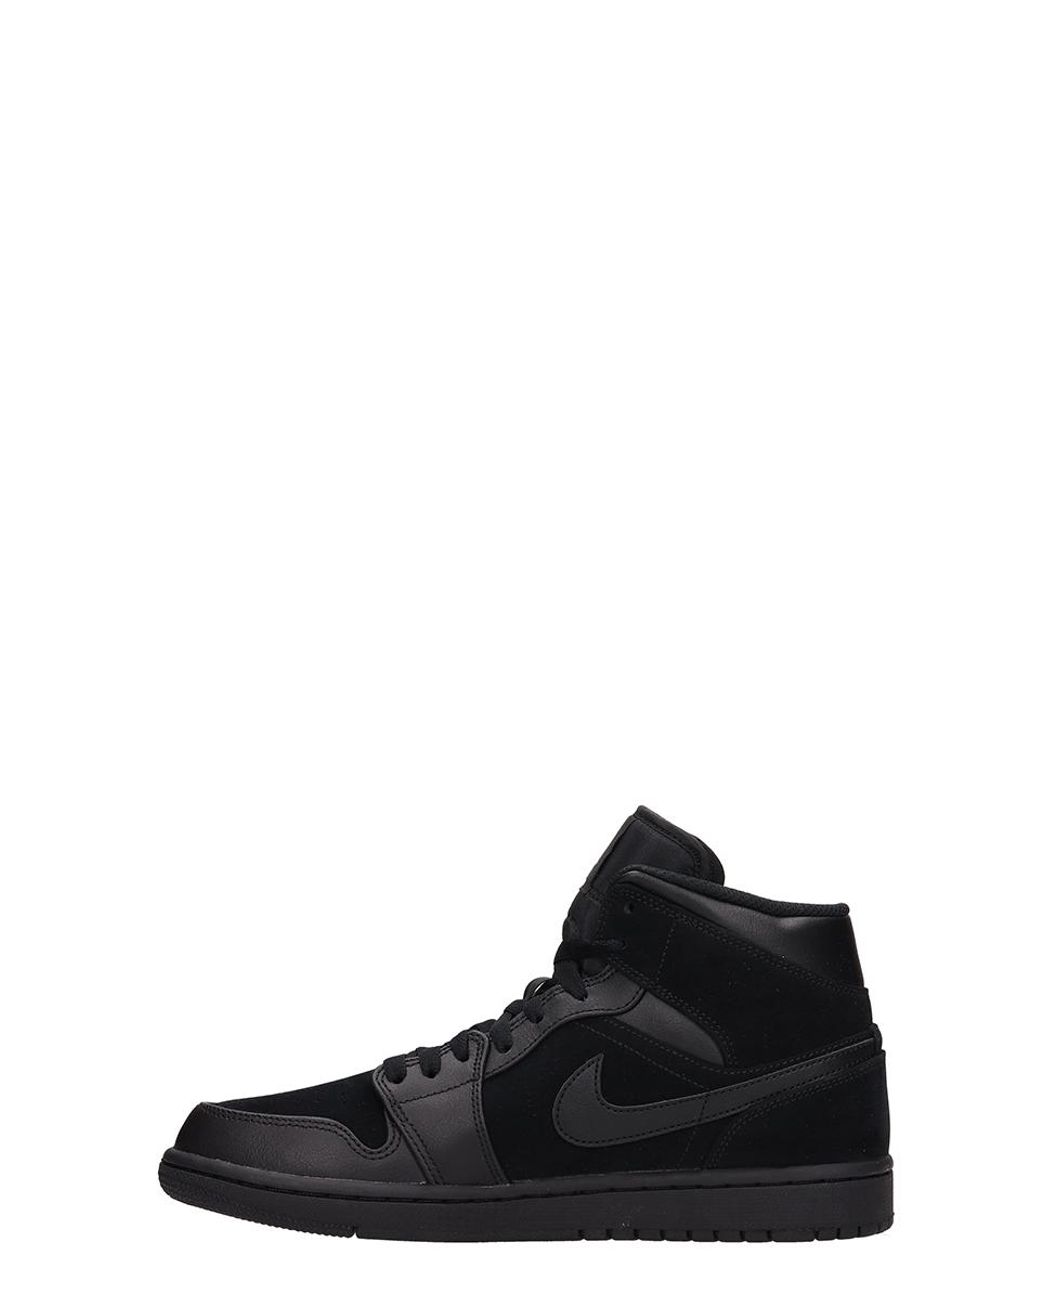 Nike Air Jordan 1 Mid Leather And Suede Sneakers In Black For Men | Lyst